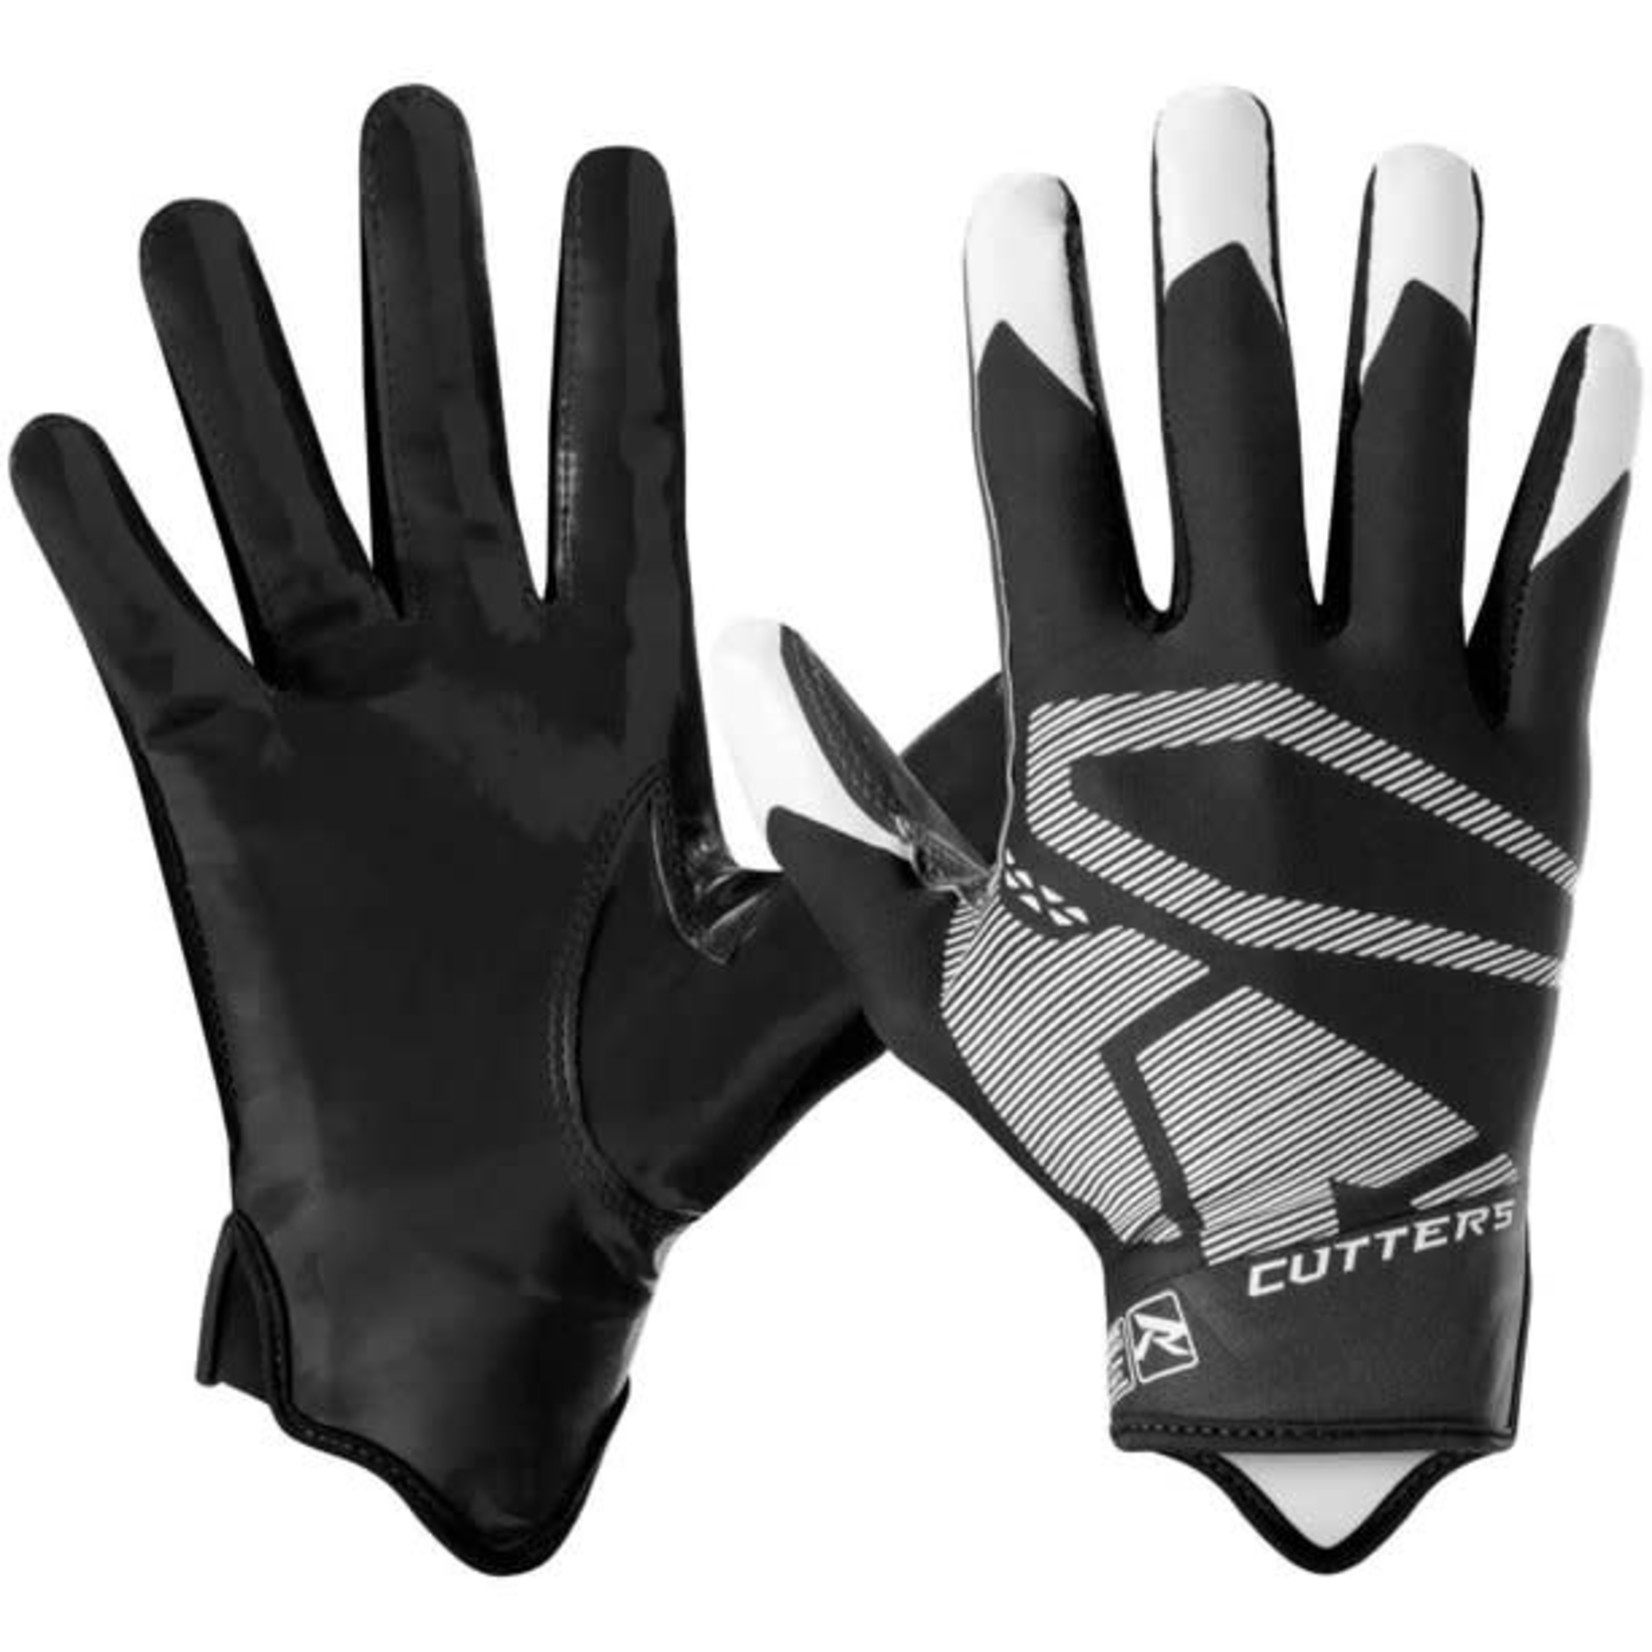 Cutters Cutters Youth Rev 4.0 Receiver’s Gloves